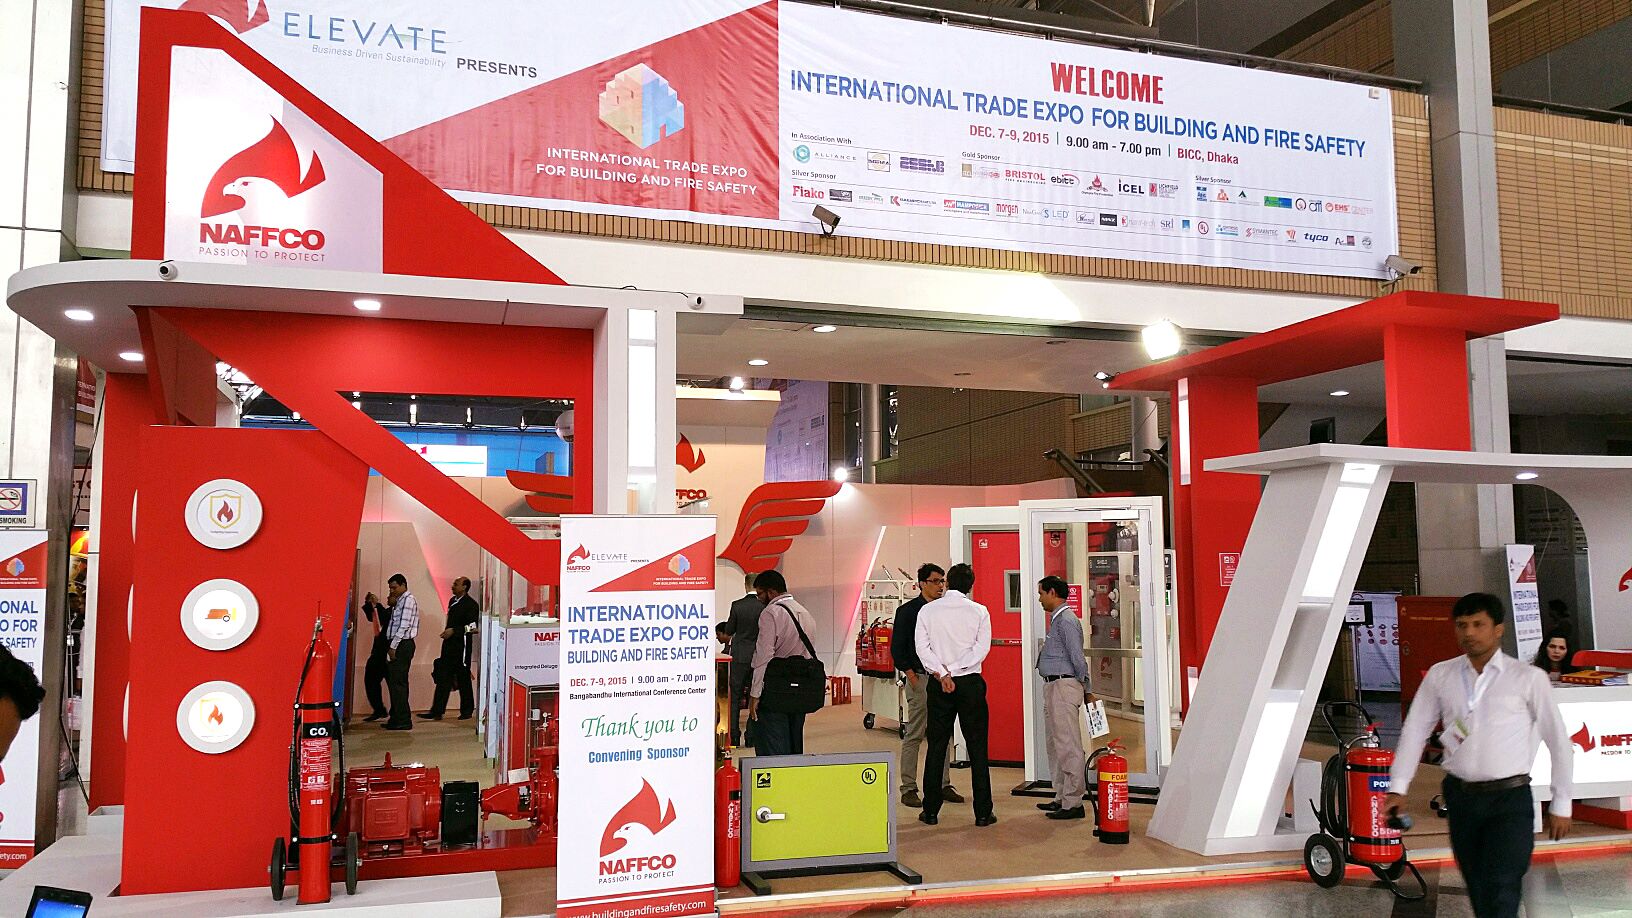 NAFFCO Participates in the International Trade Expo for Building and Fire Safety